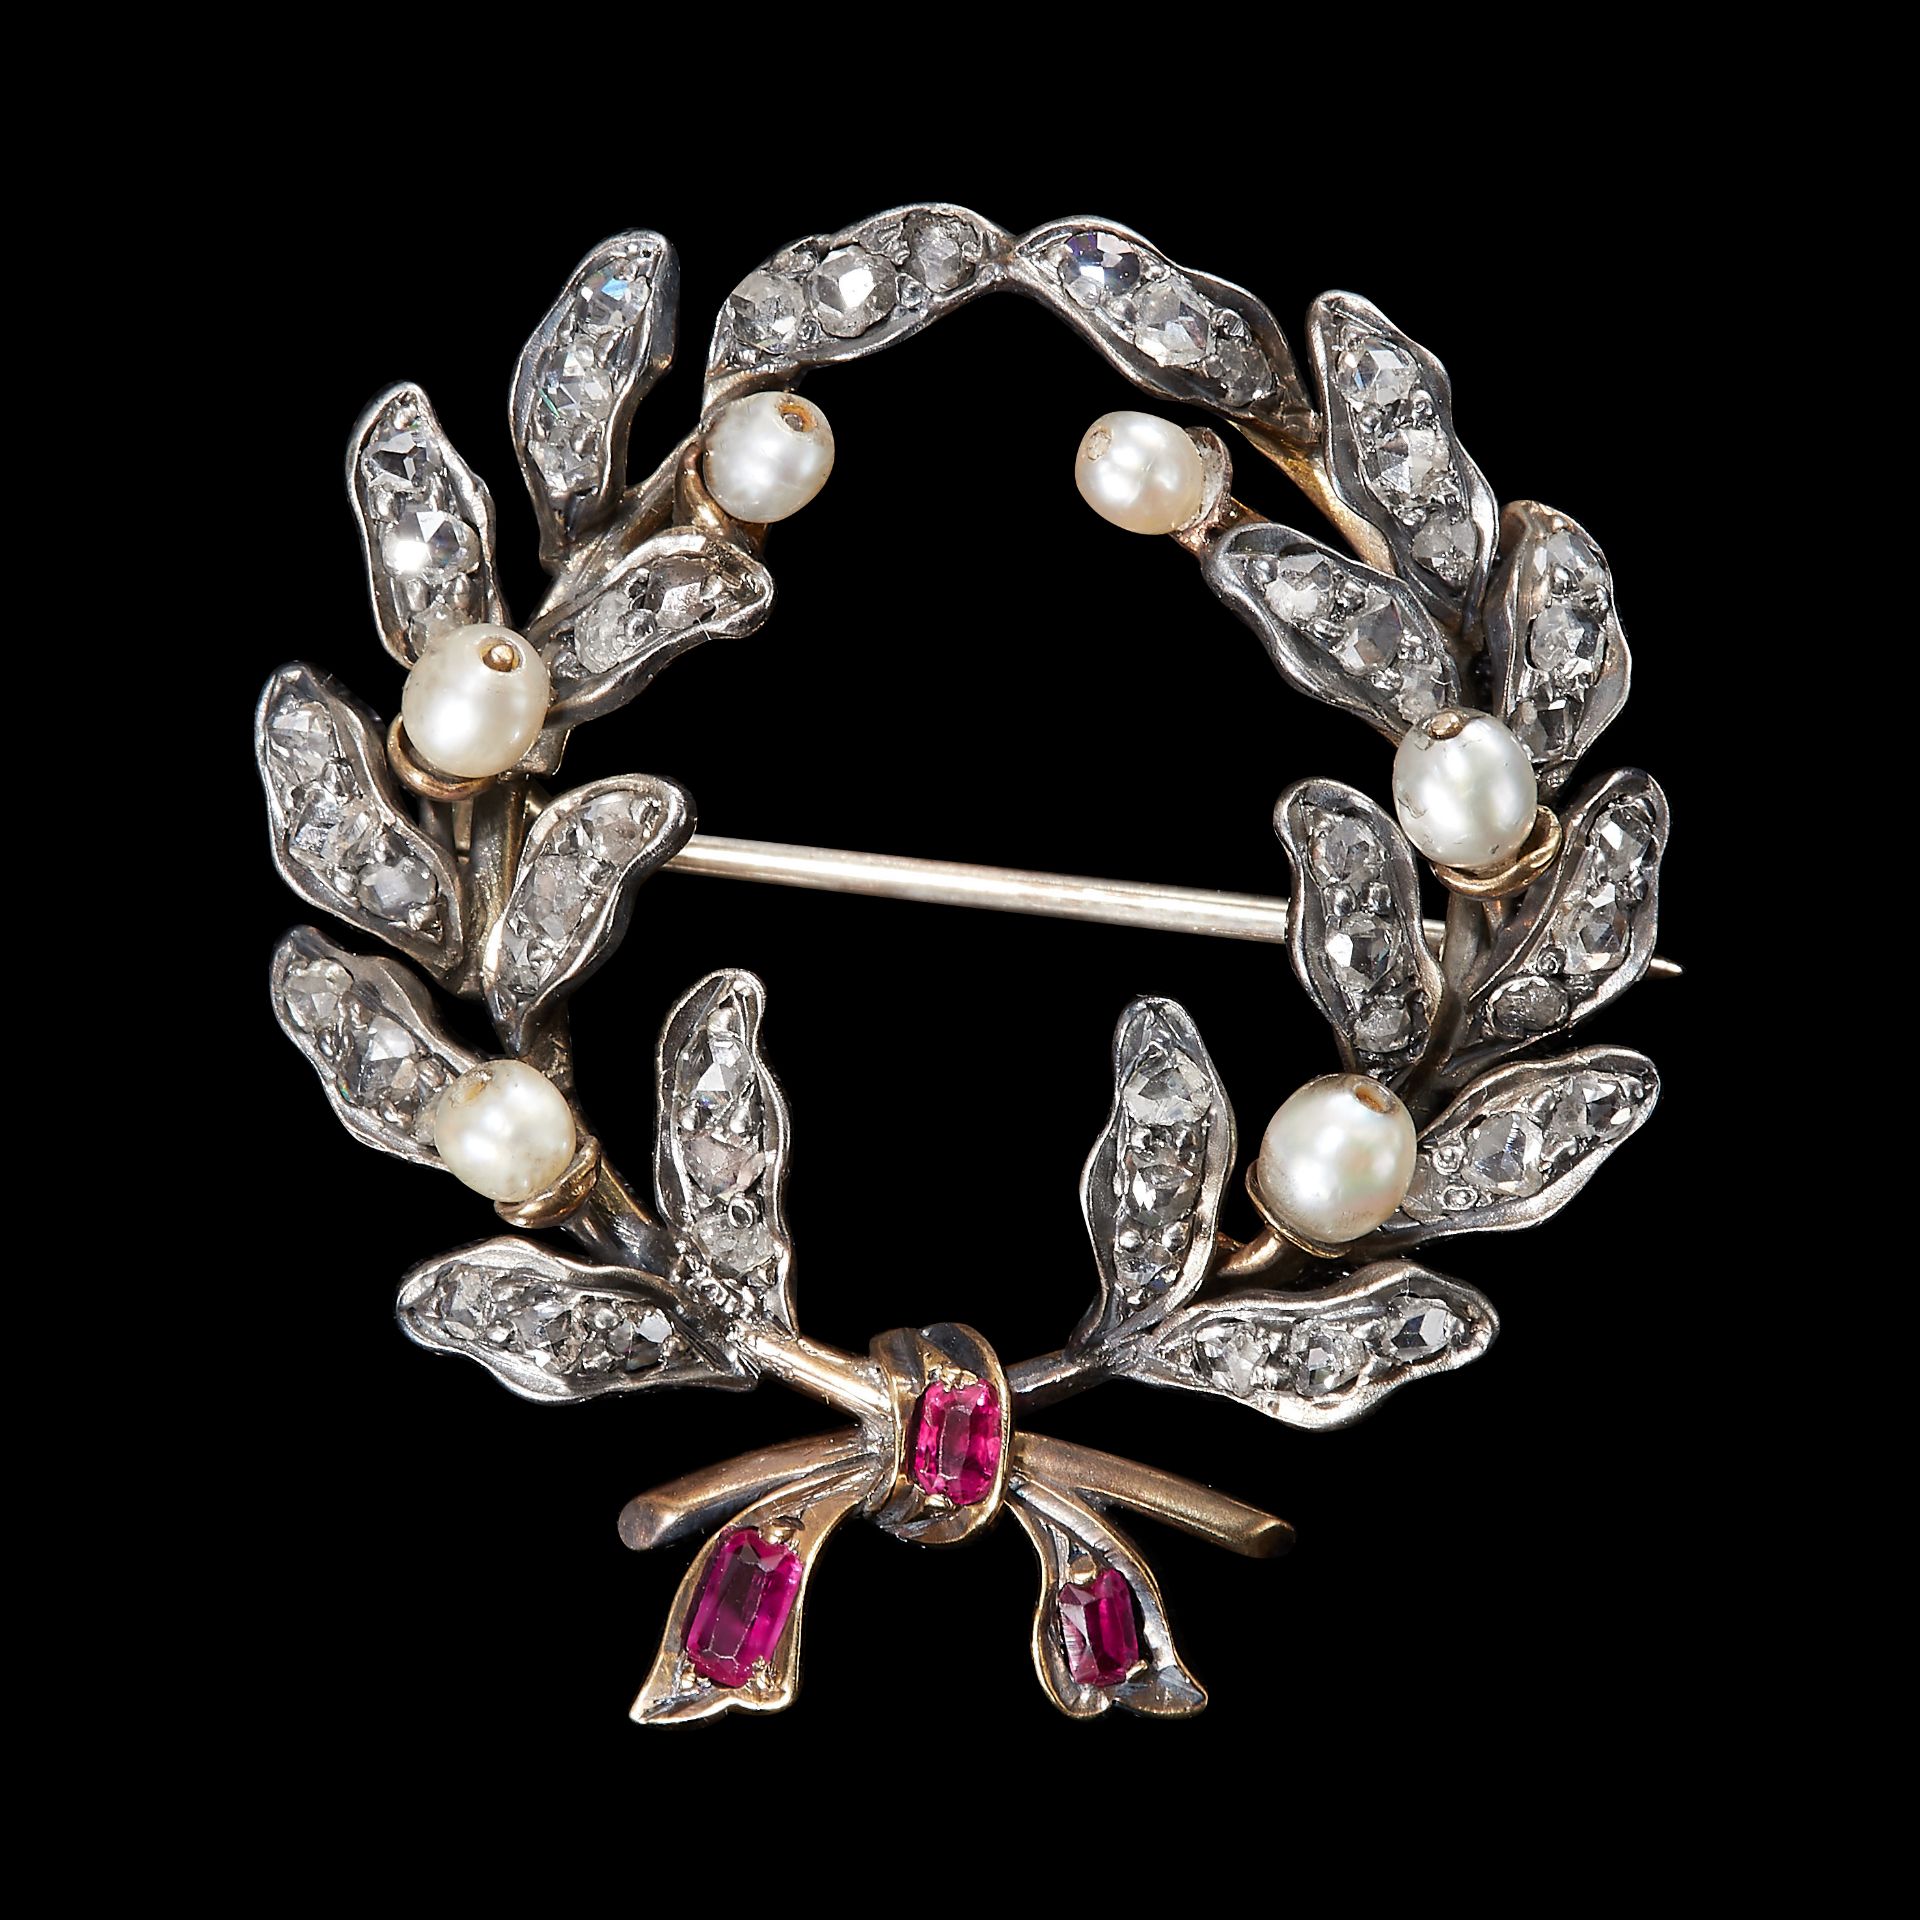 VICTORIAN DIAMOND, PEARL AND RUBY LAUREL BOW BROOCH